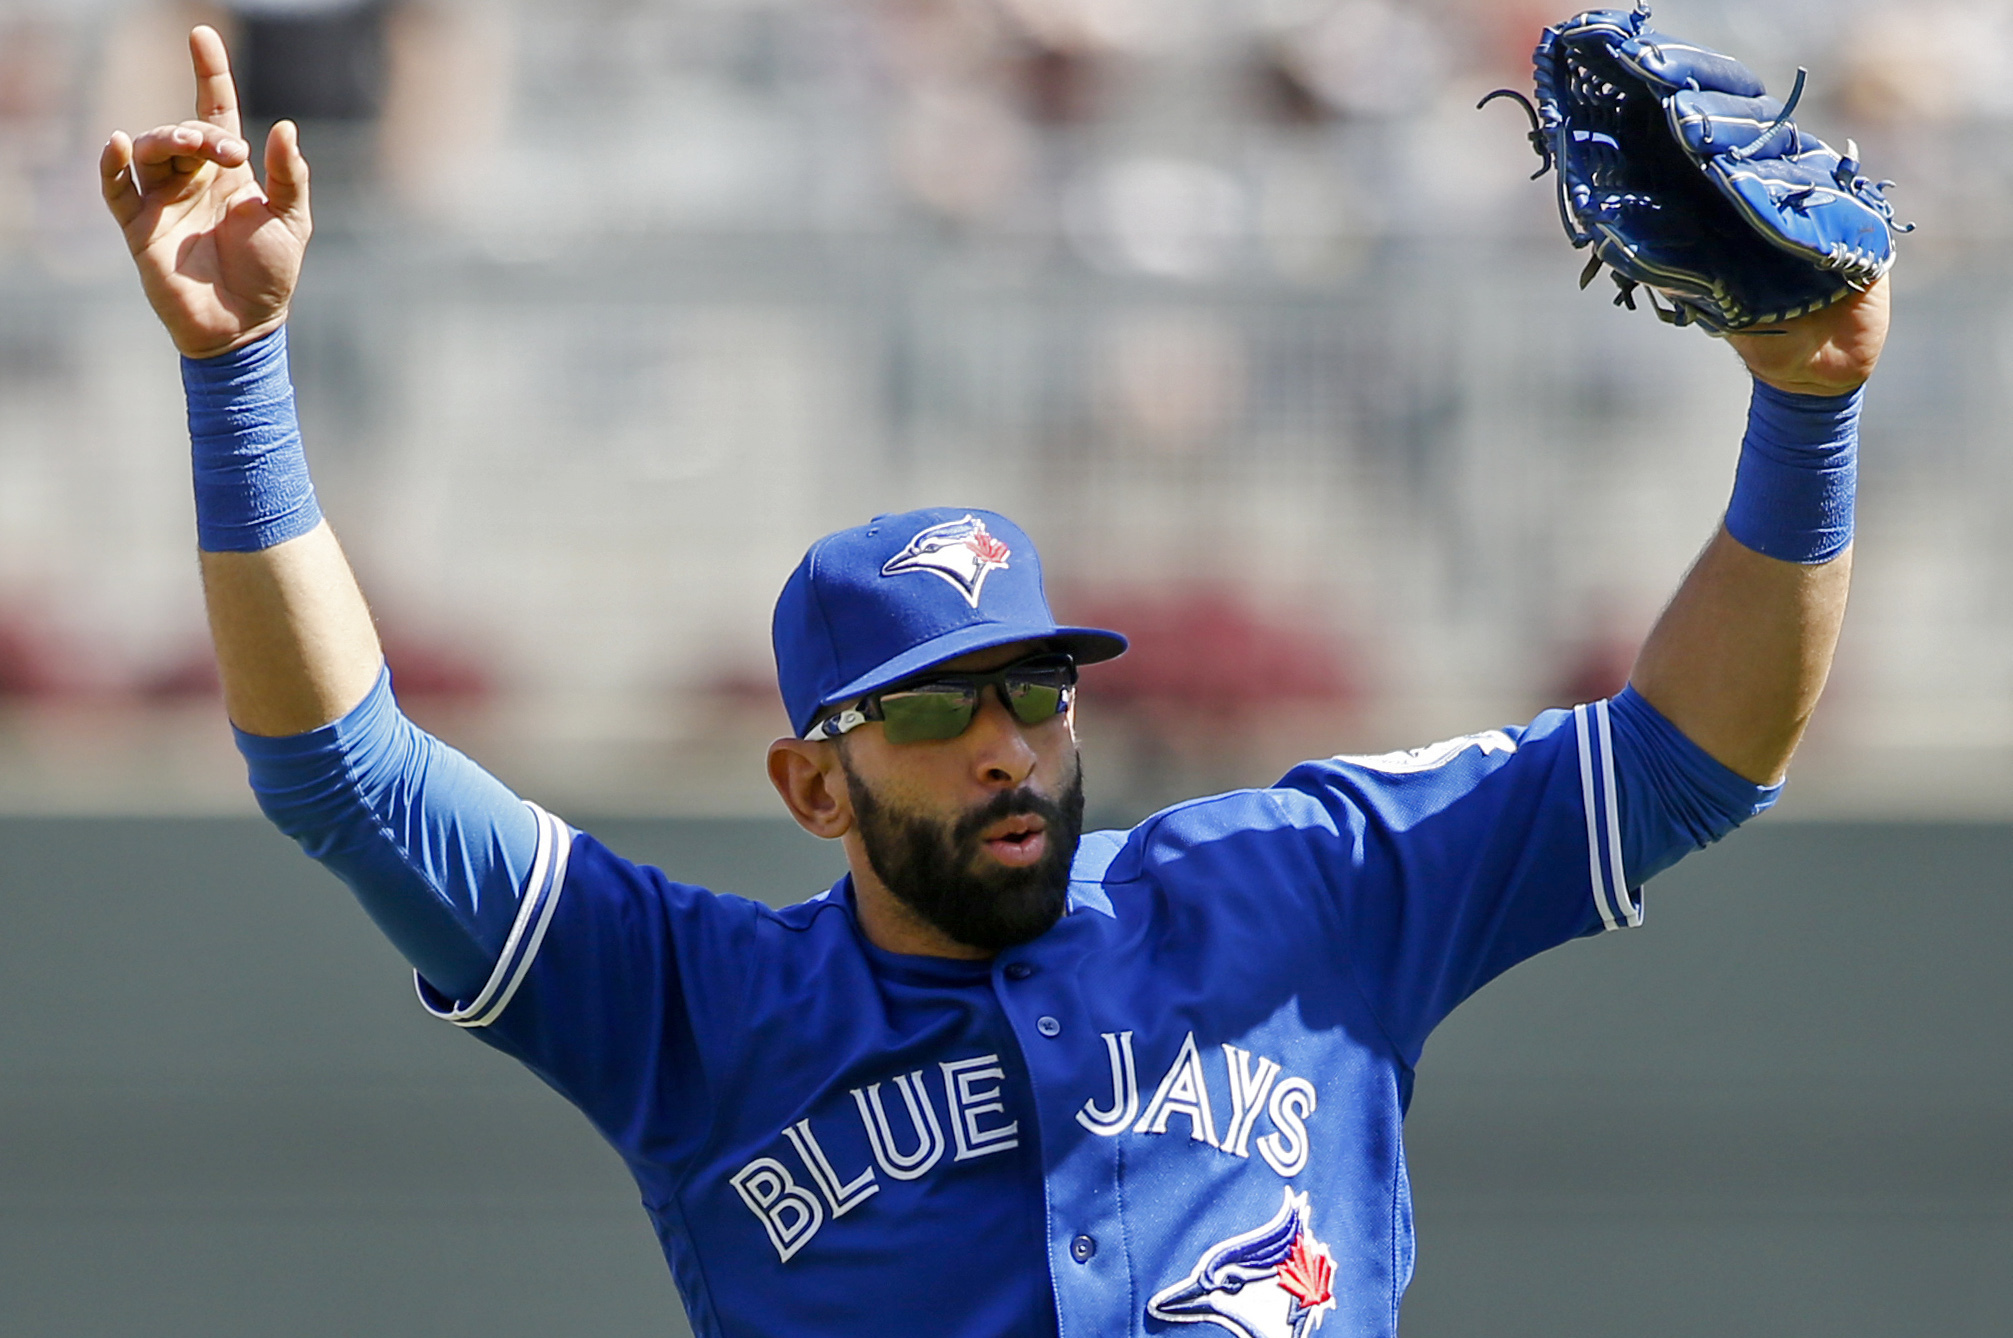 José Bautista signs one-day contract to retire with Toronto Blue Jays